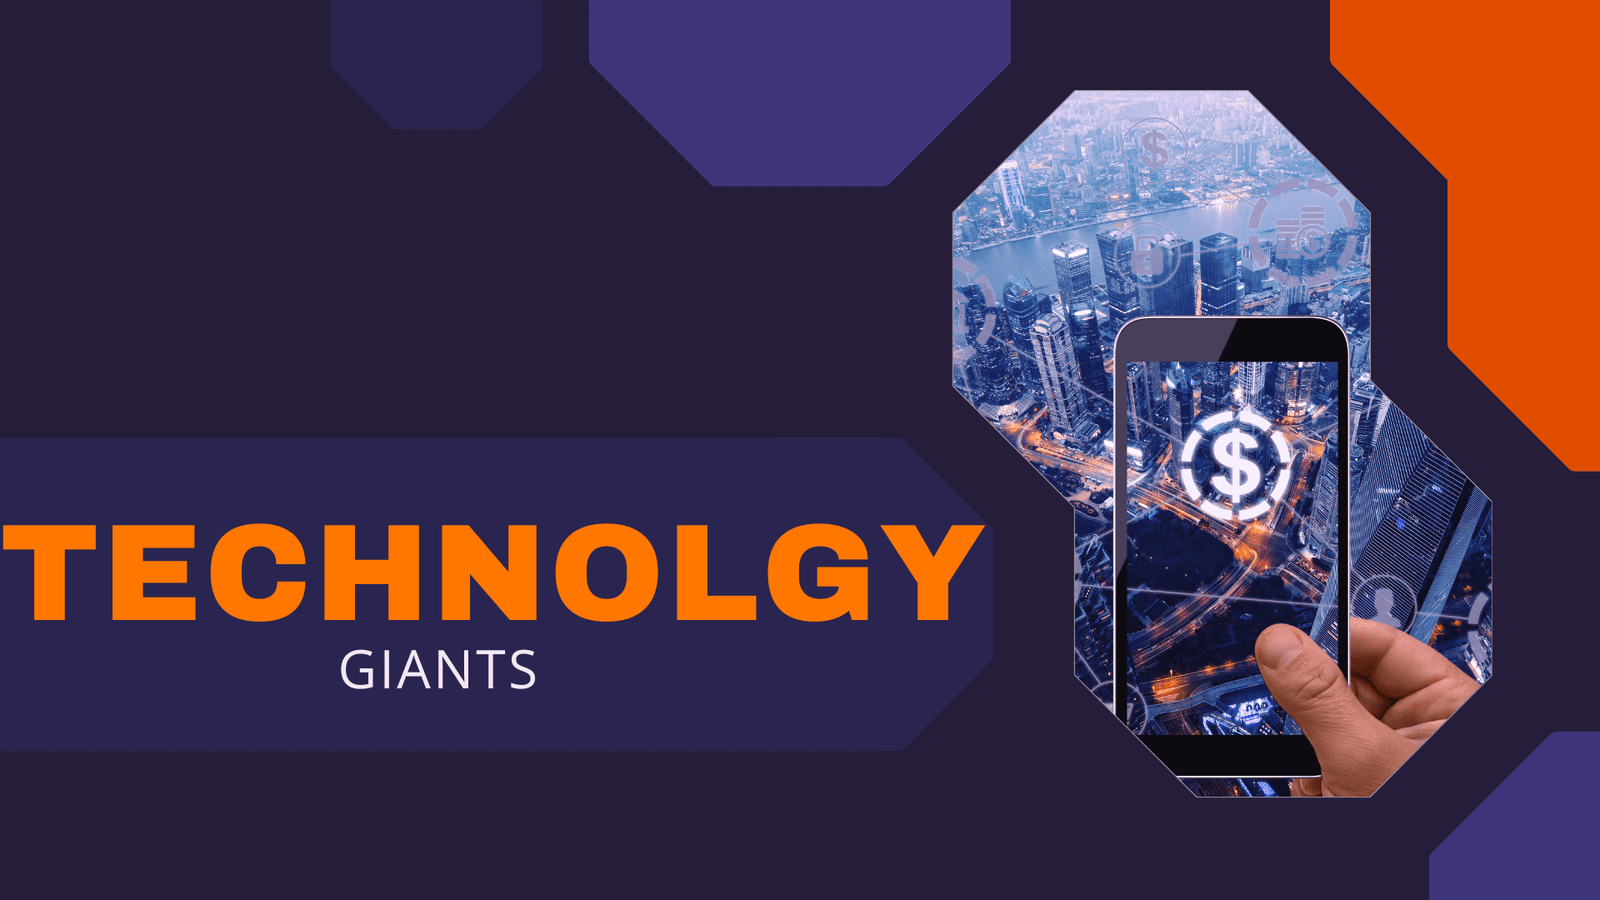 Some of the most important technological companies that control the global security system are called technology Giants. There are various types of Technology Giants like Google, Facebook, and Amazon as well.